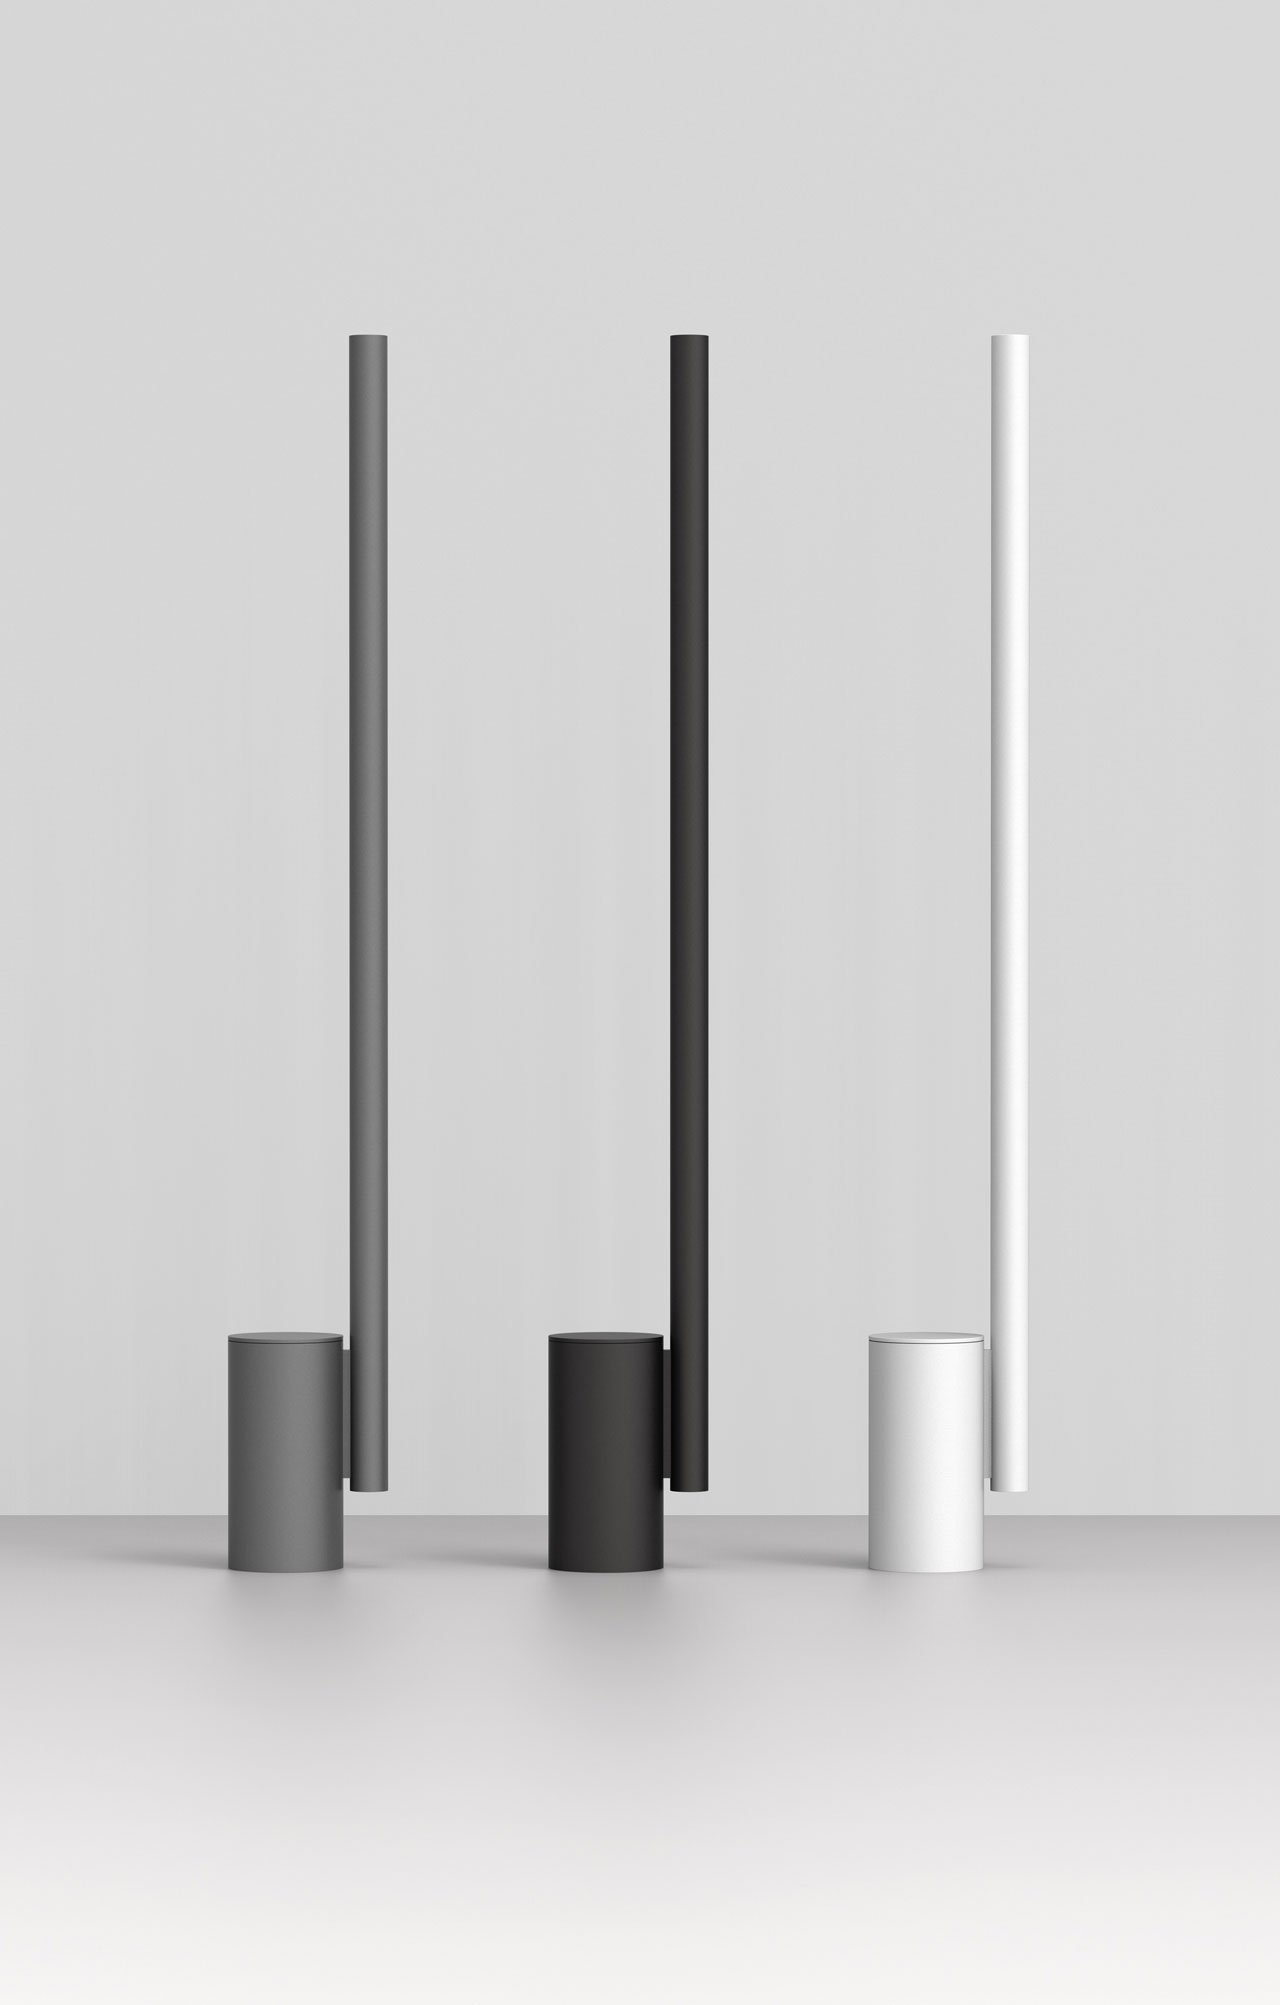 The w164 Alto high-tech uplighter by Wästberg in collaboration with Dirk Winkel.